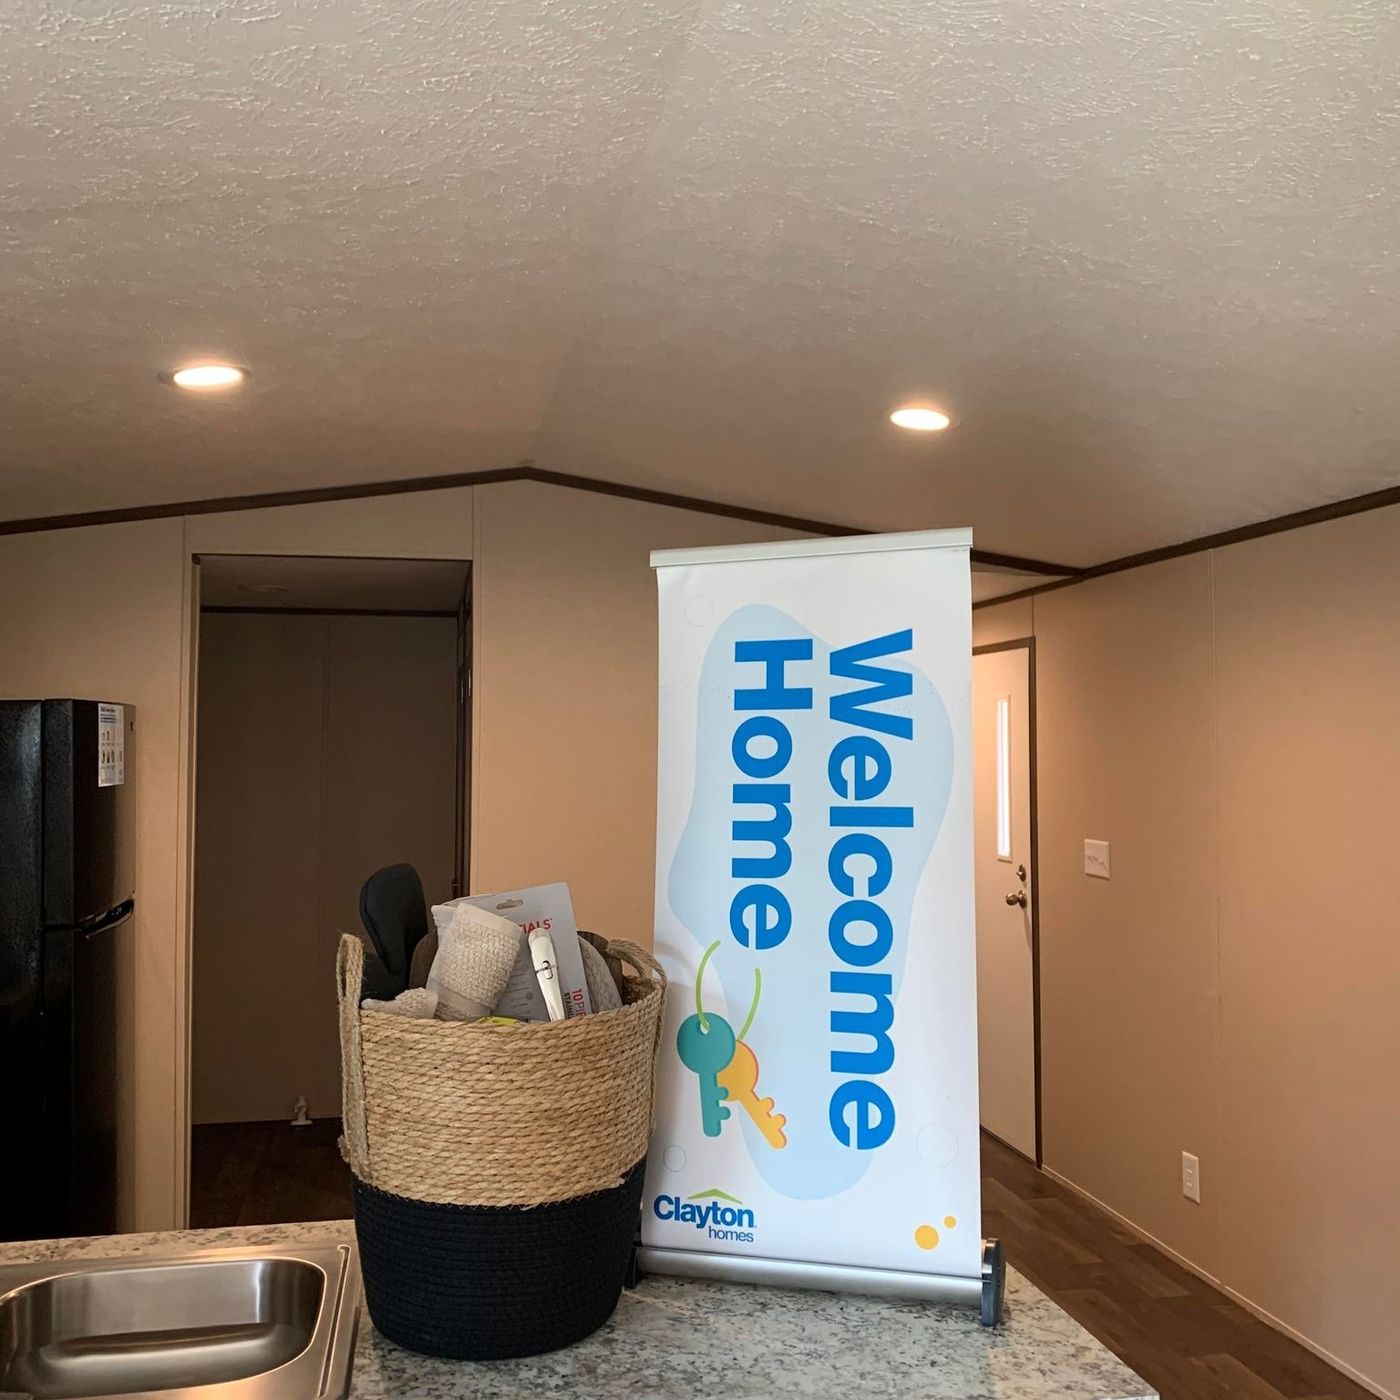 ULTIMATE RENTAL P. welcome home image